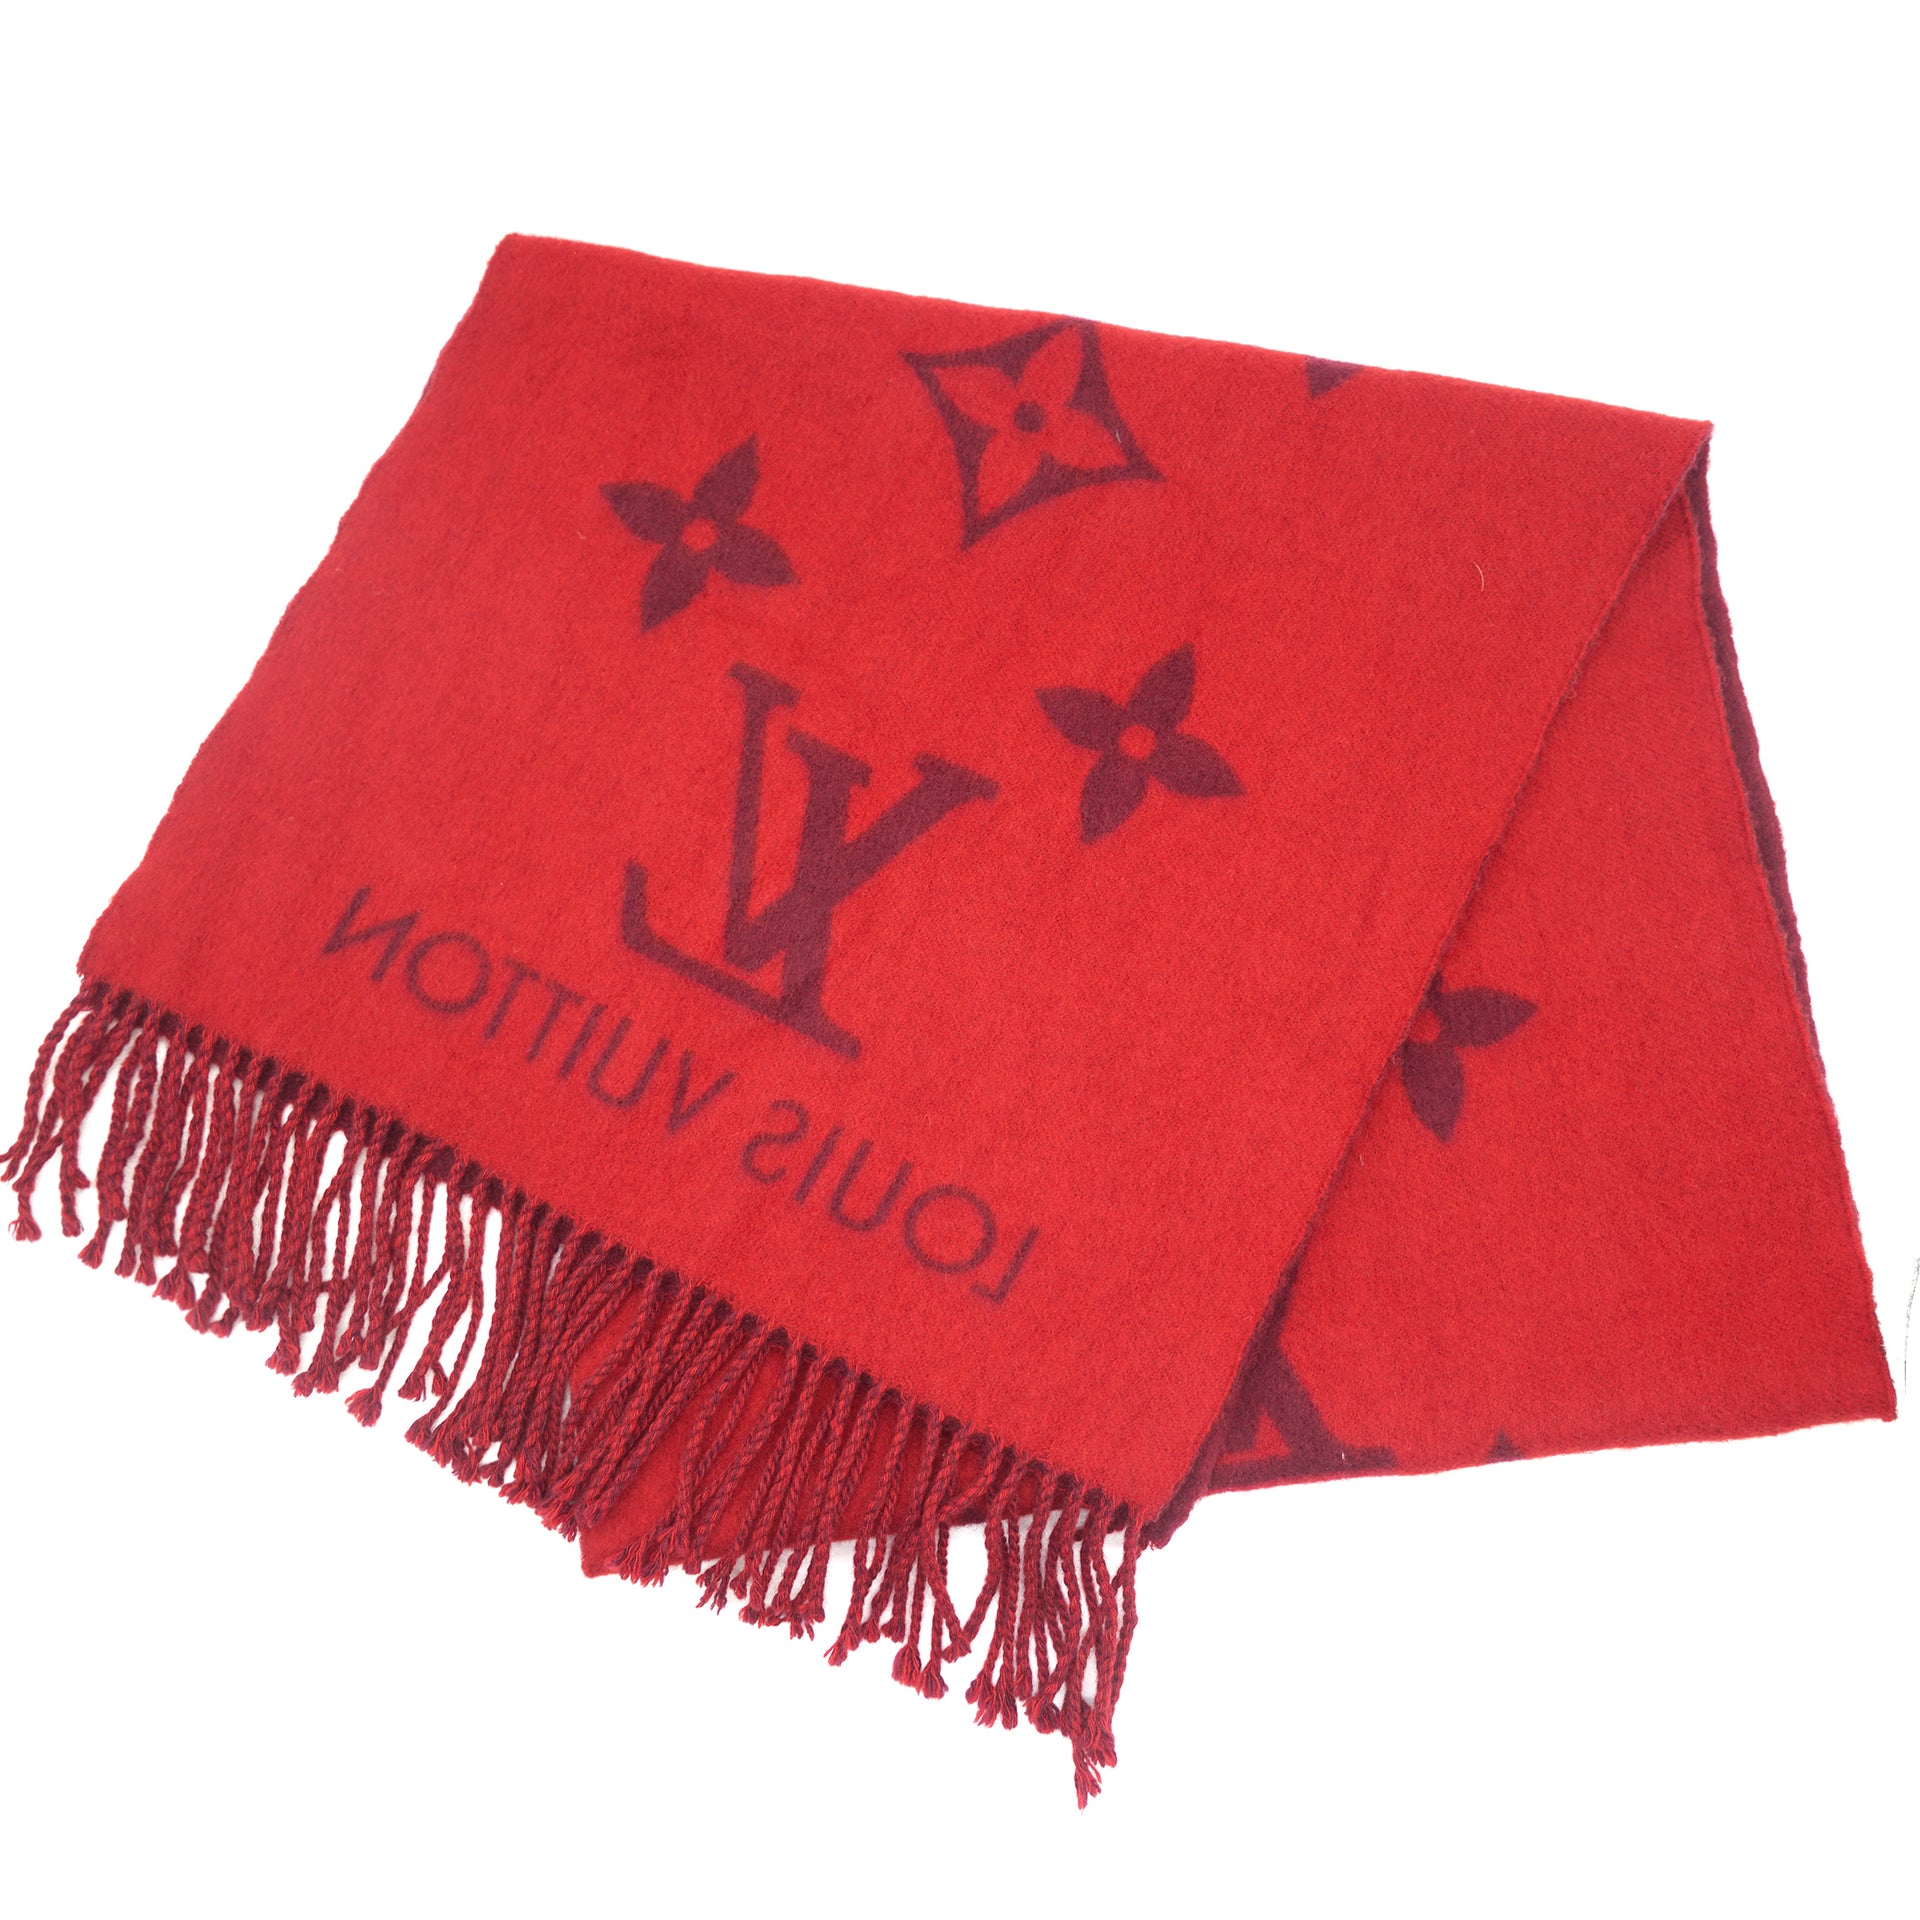 Louis Vuitton - Authenticated Reykjavik Scarf - Cashmere Pink for Women, Very Good Condition